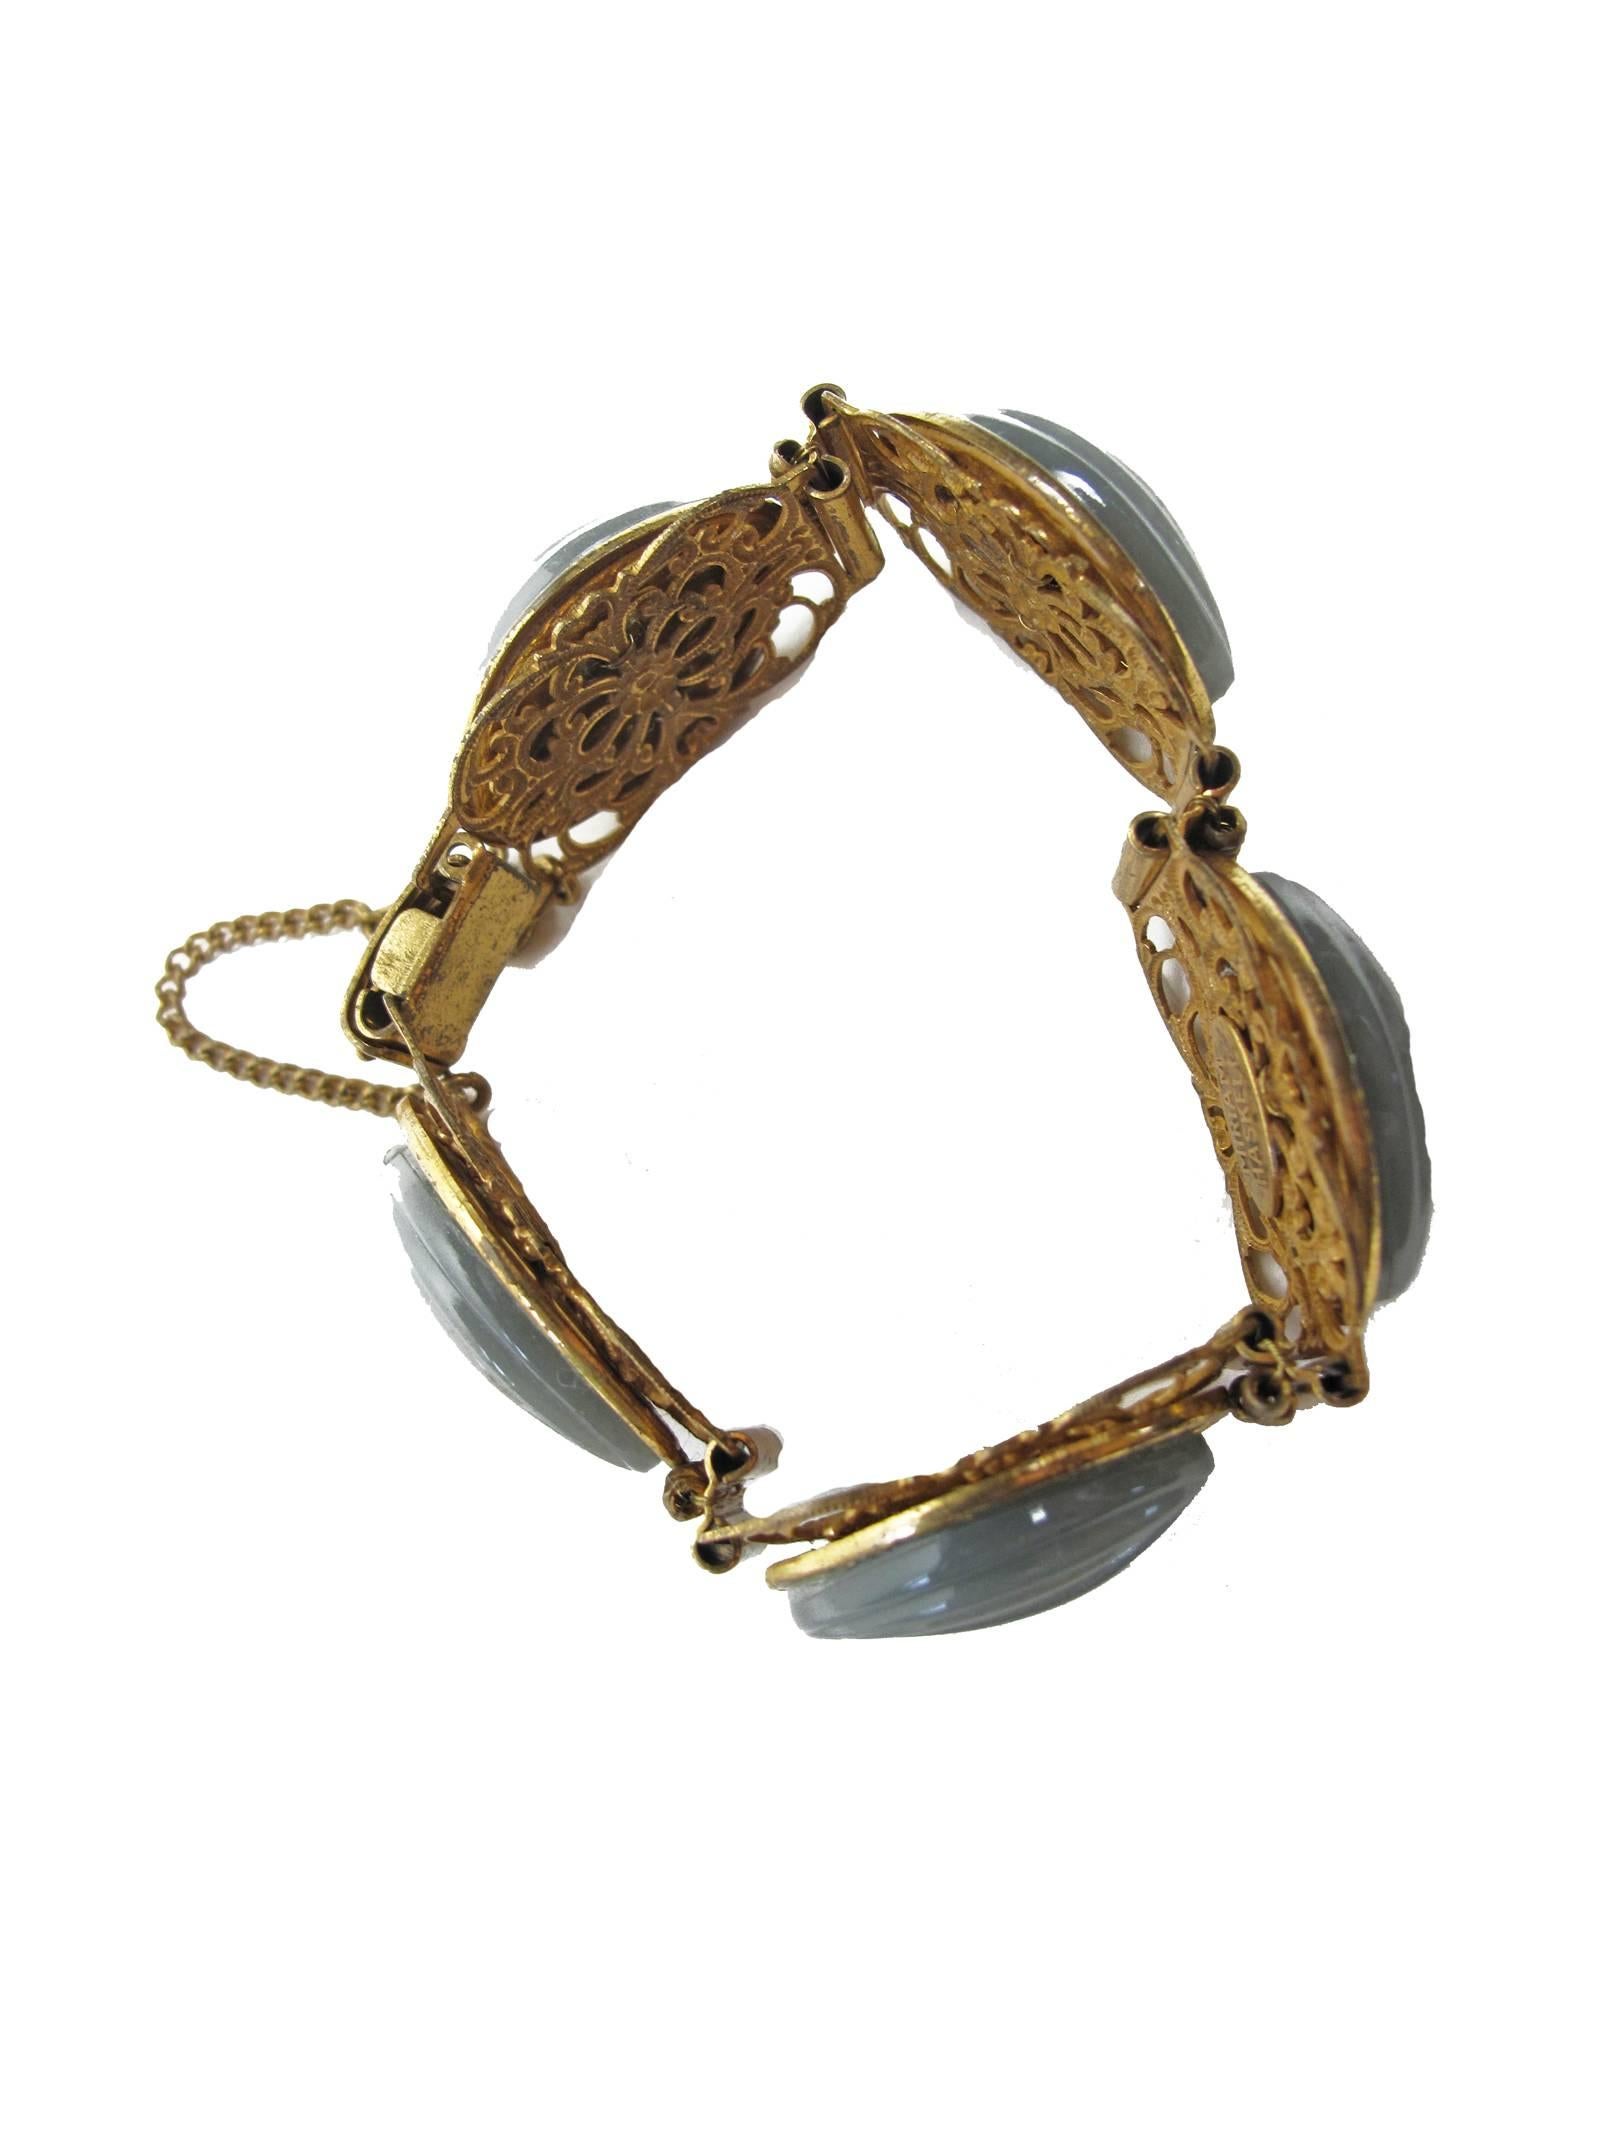 Miriam Haskell signed goldtone and grey oval link bracelet.  Condition: Very good.  3/4" H x 8 1/2" length. 

We accept returns for refund, please see our terms.  We offer free ground shipping within the US. Please let us know if you